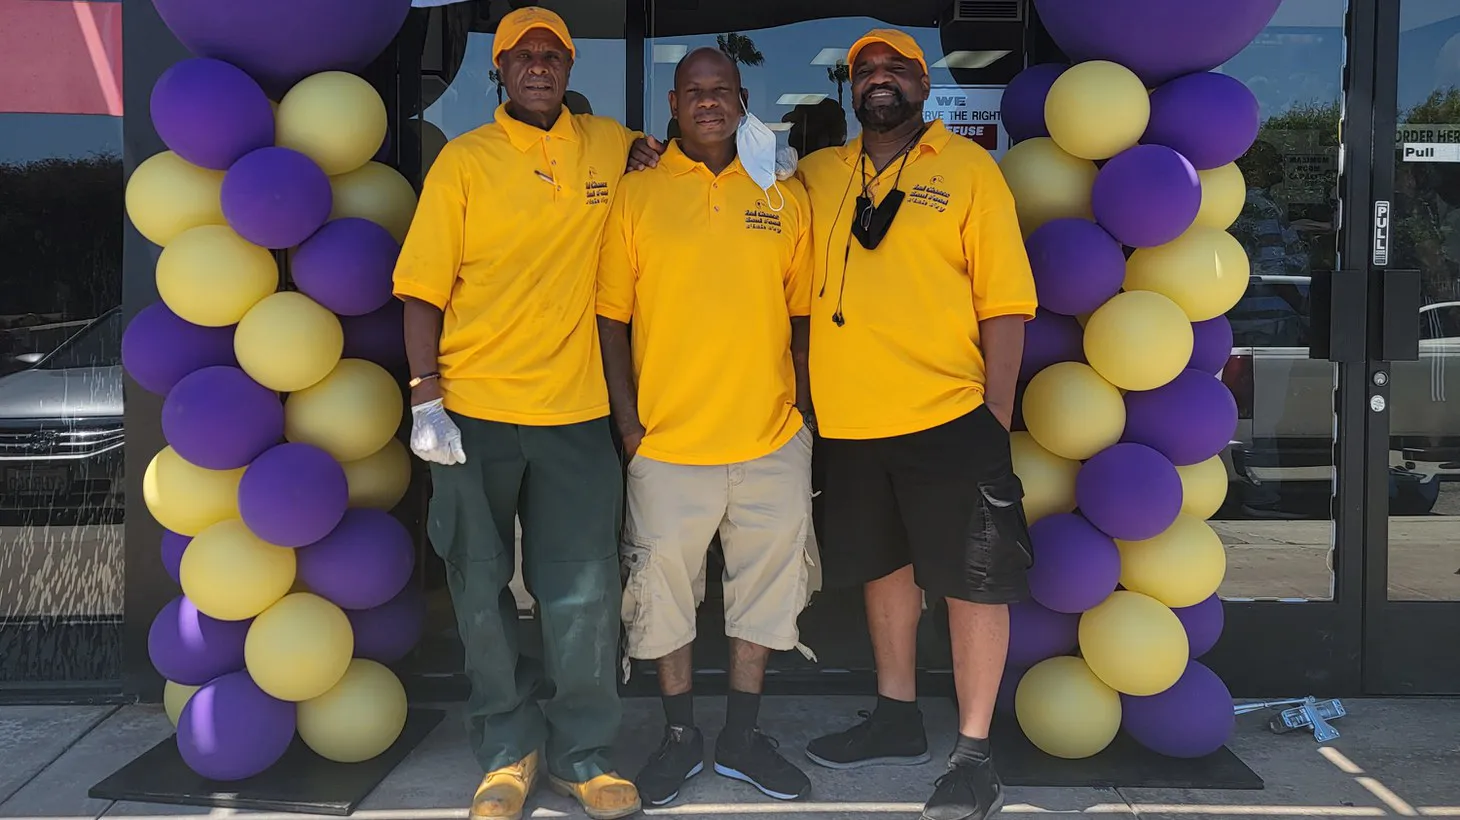 (From left to right) Owners Johnny Smith, Dion Corsey, and Ray Ford at the grand opening of 2nd Chance Soul Food Fish Fry .